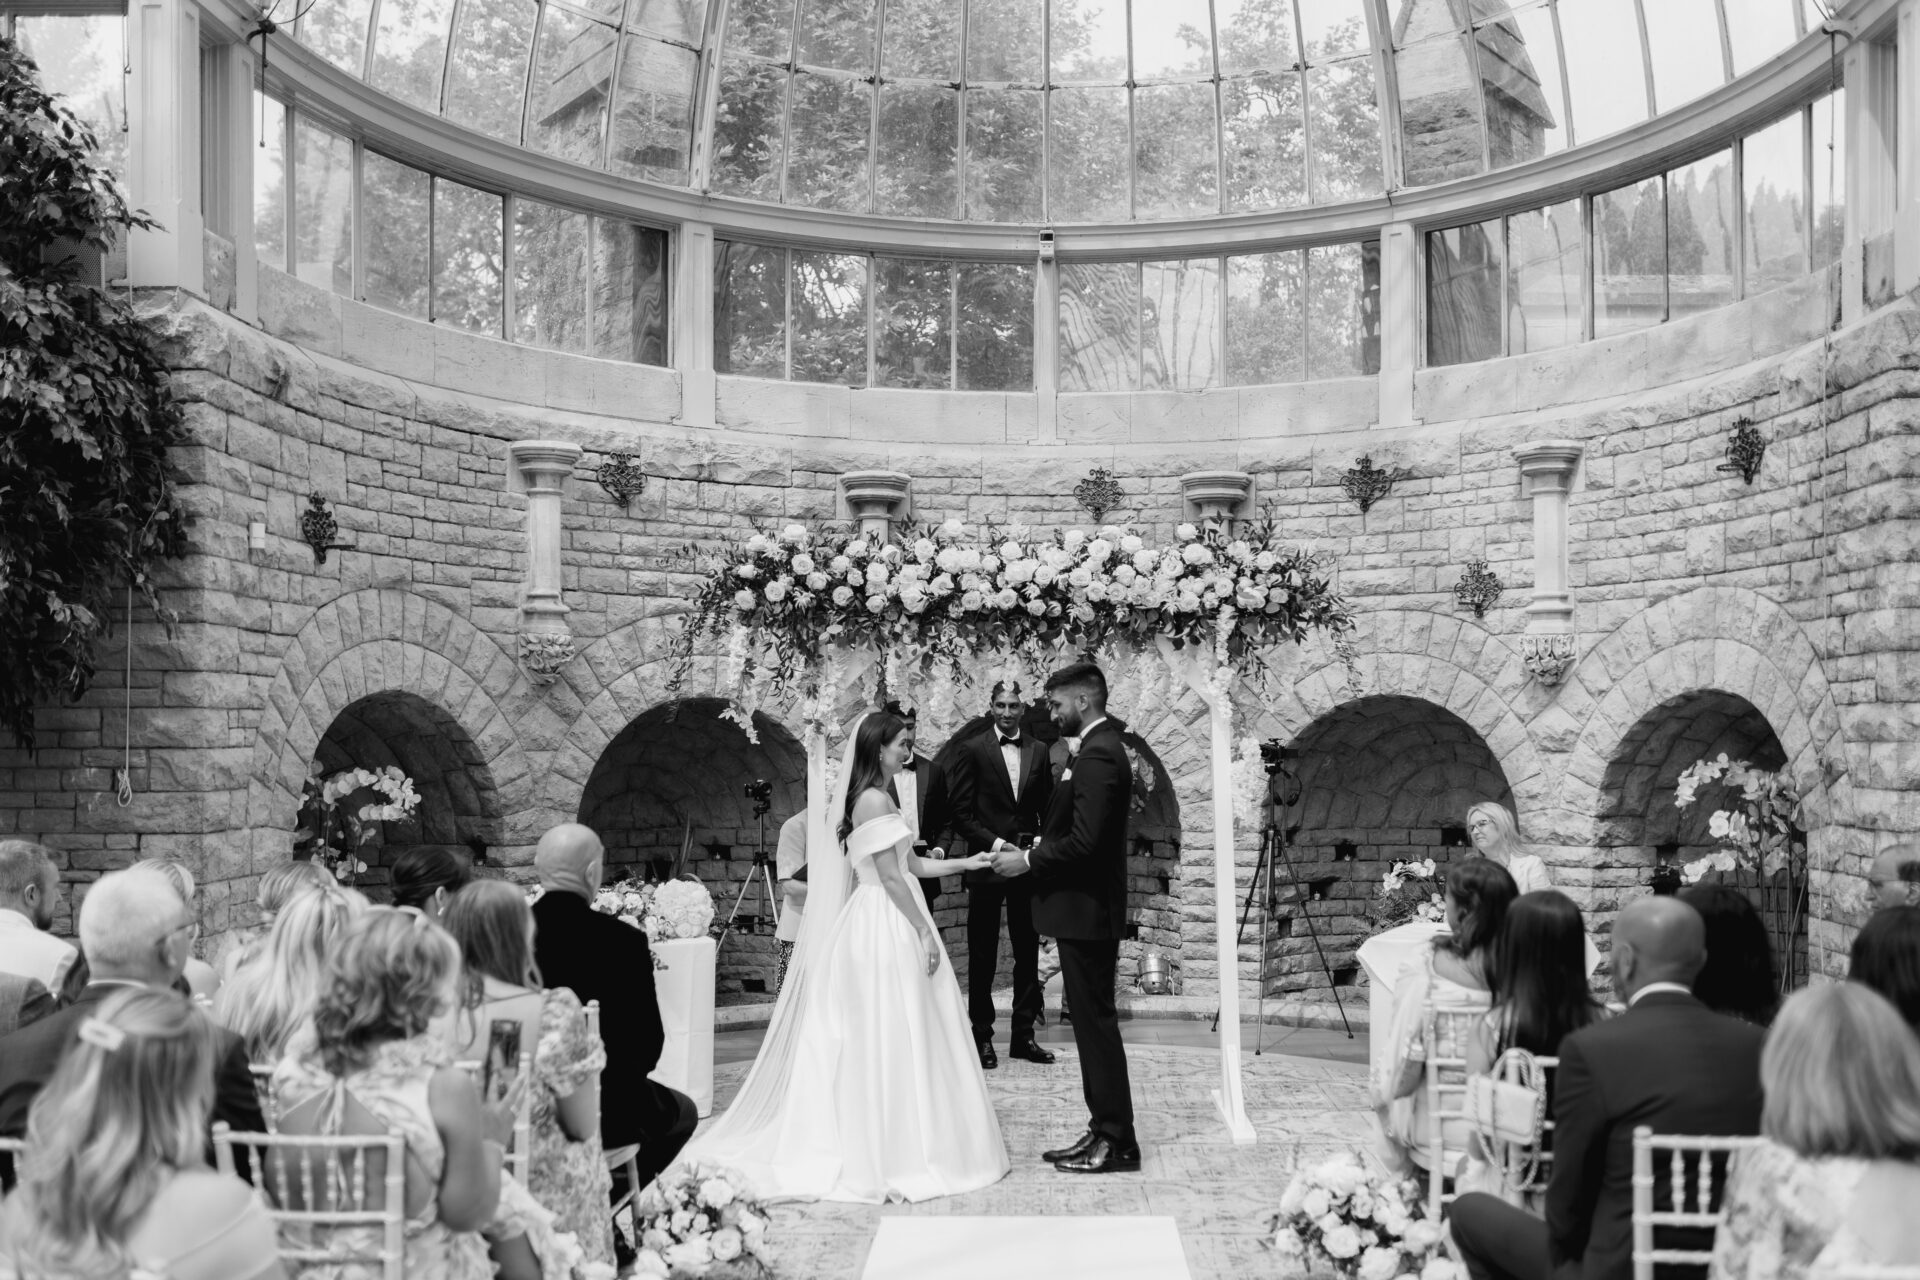 The bride and groom exchange vows during the wedding ceremony in the Orangery at Tortworth Court